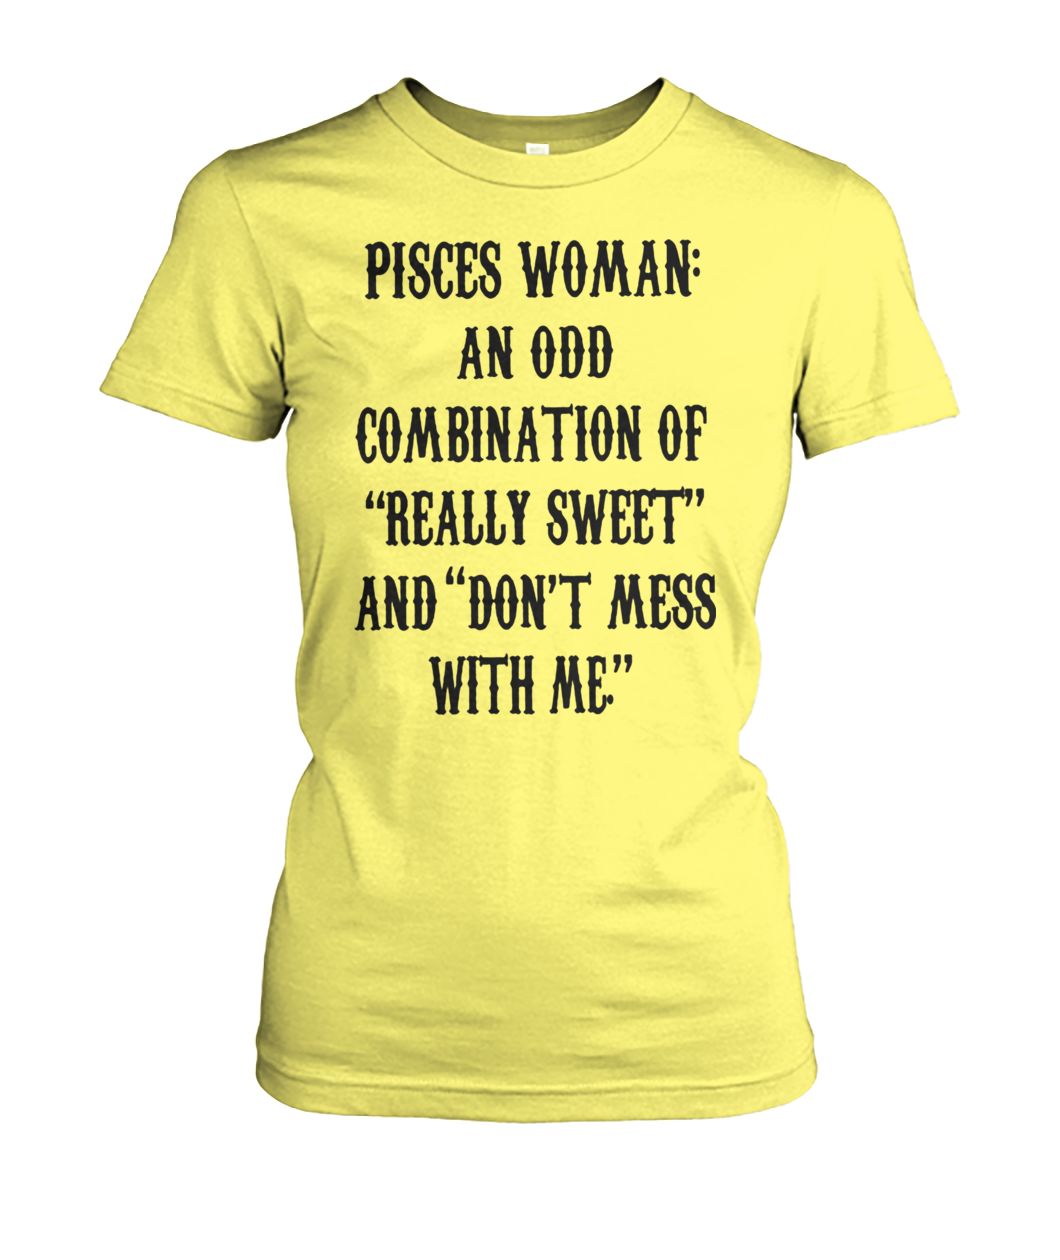 Pisces woman an odd combination of really sweet women's crew tee